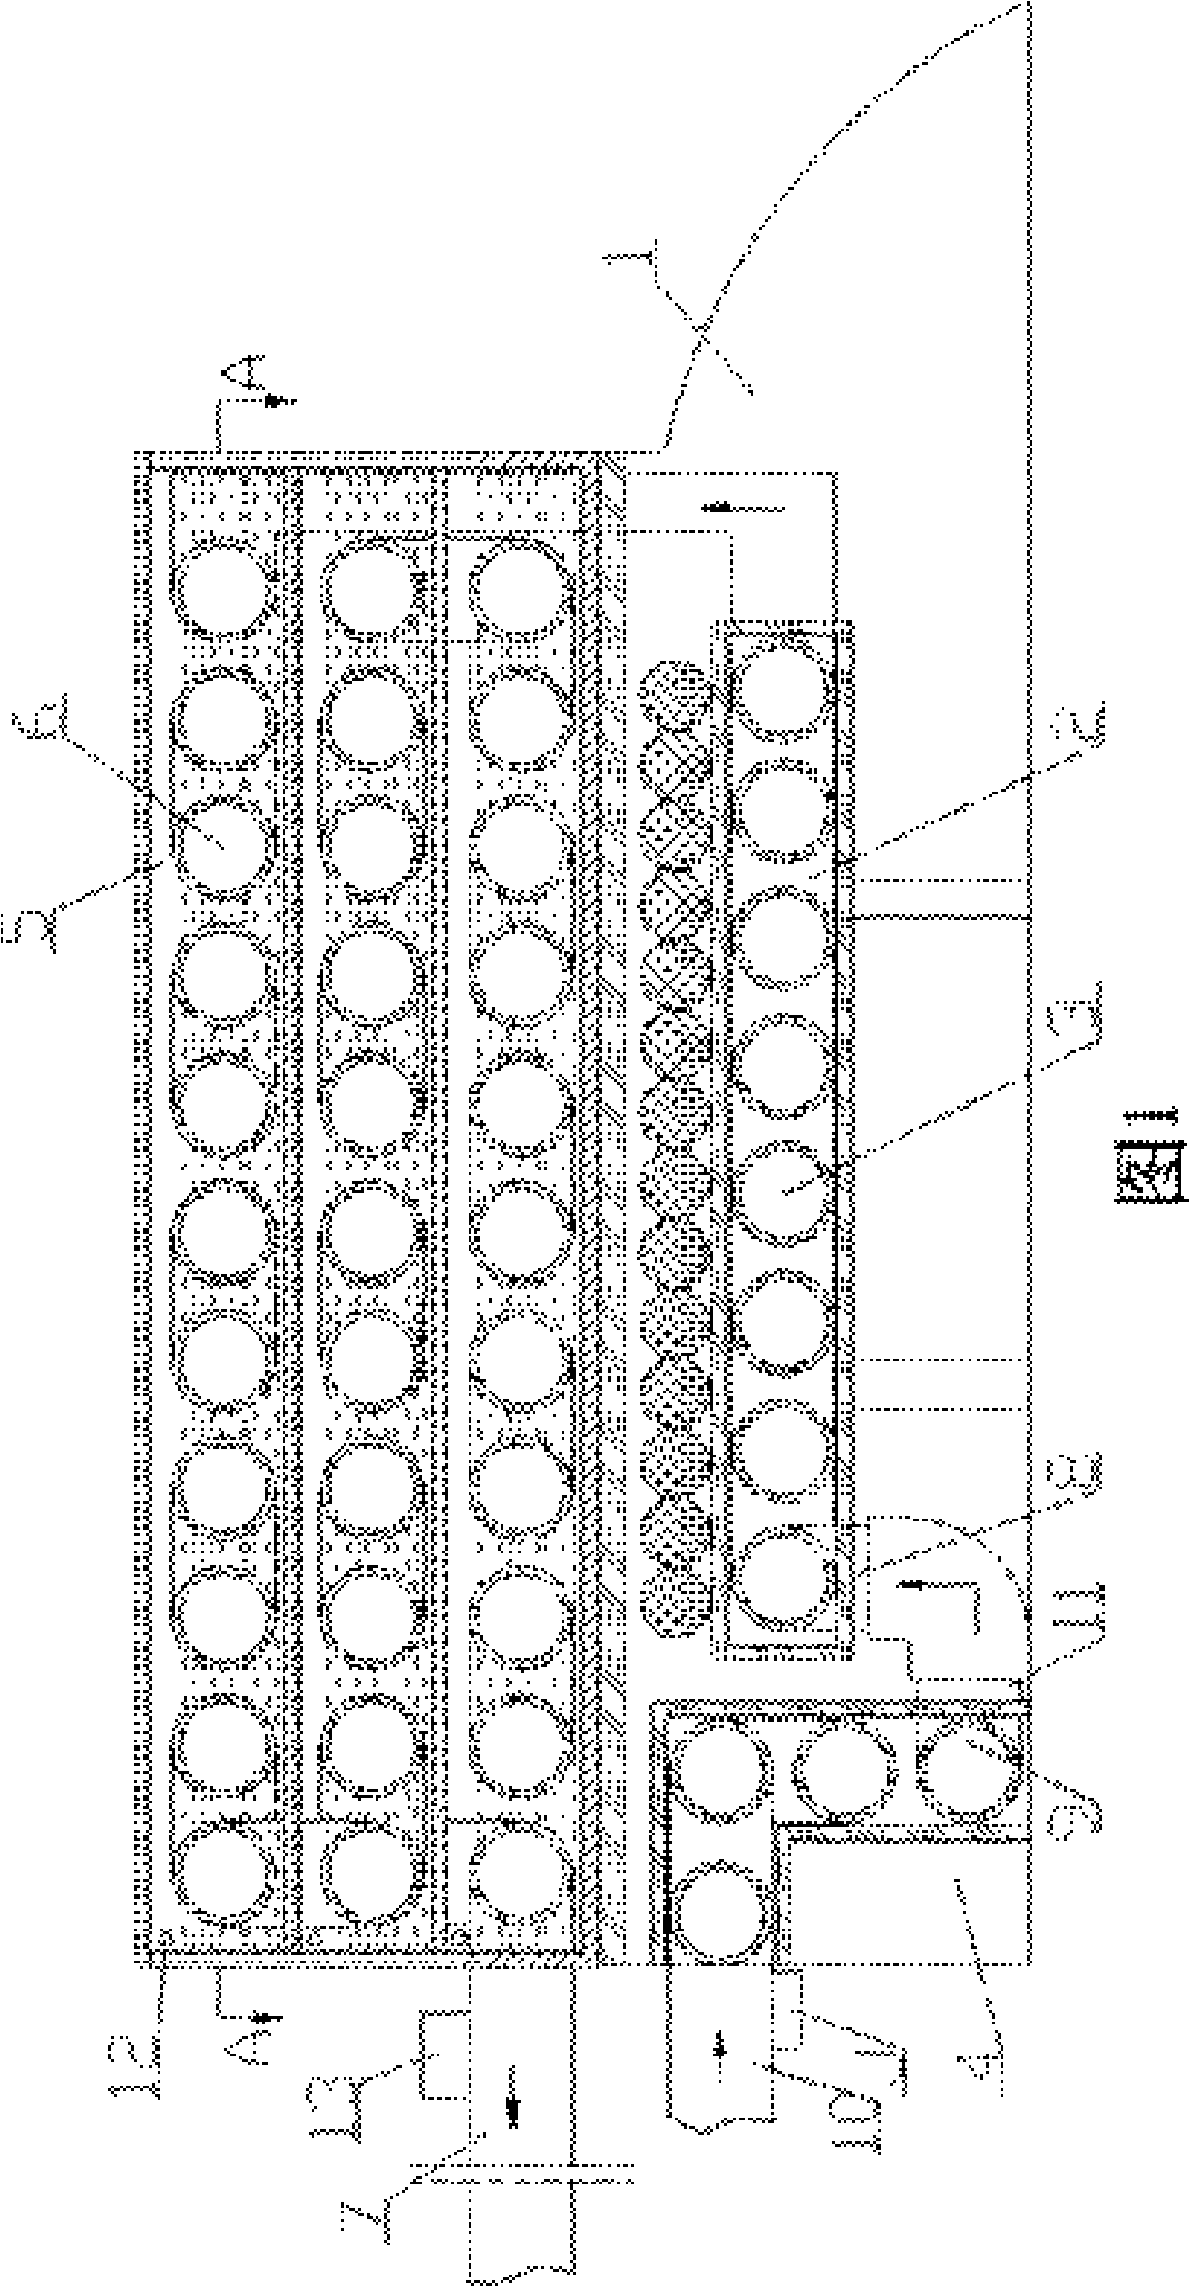 High-efficiency, energy-conserving and electromagnetical instantaneously heated type safety water heater and method for manufacturing same